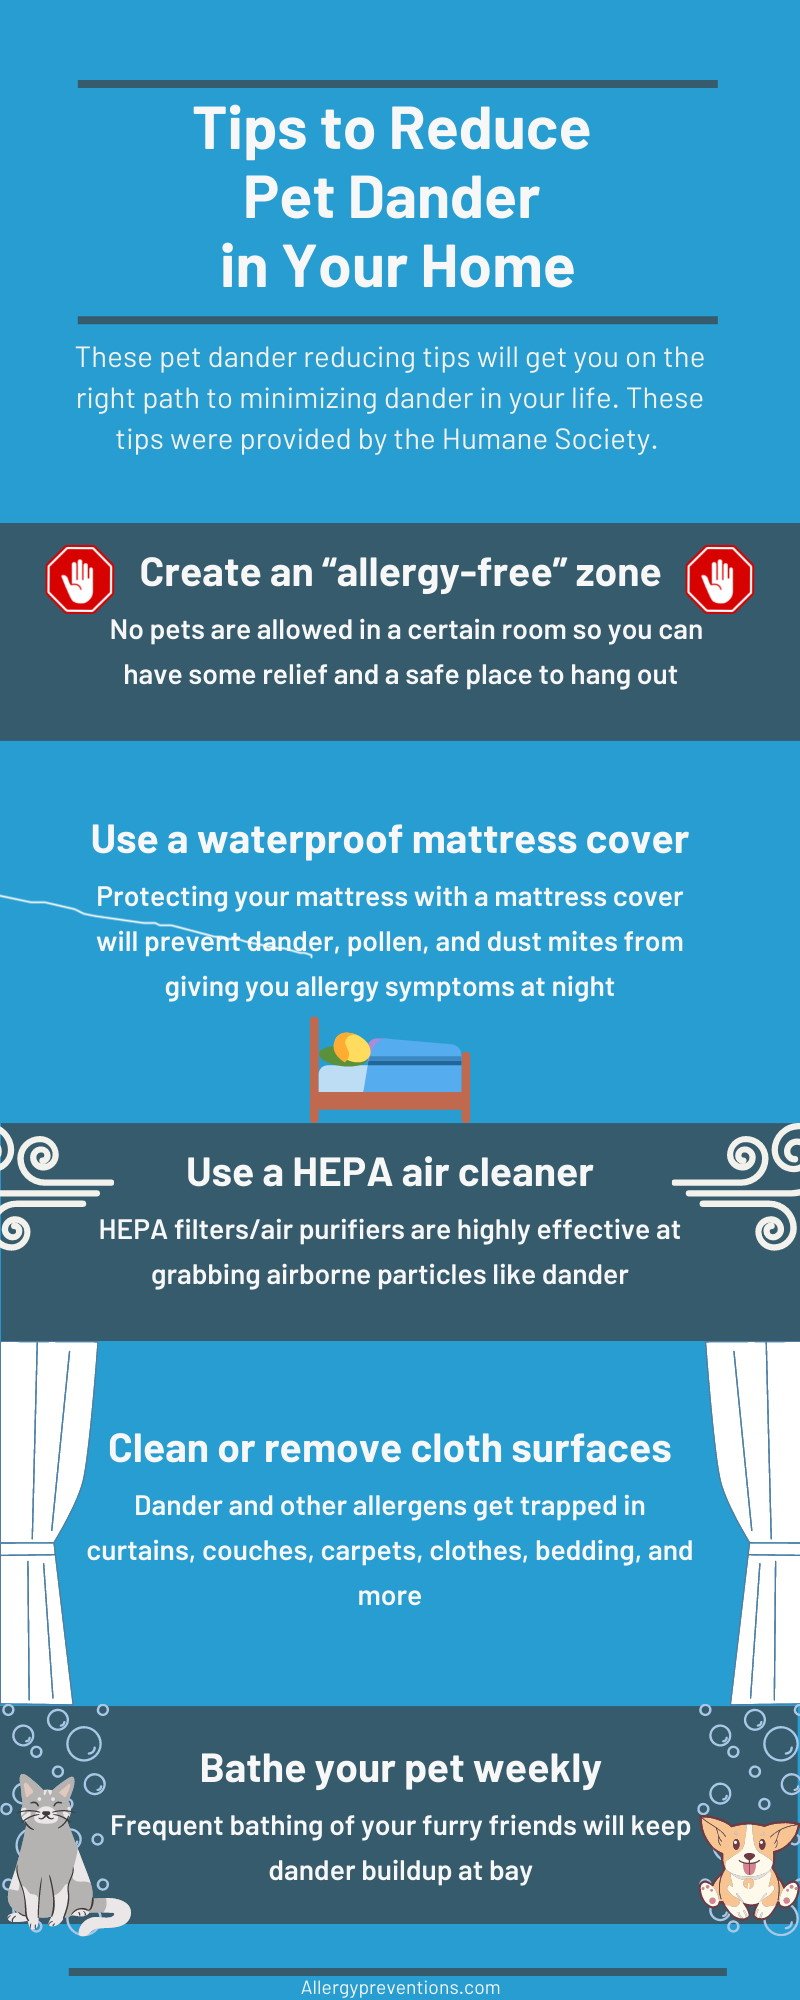 reducing-pet-dander-infographic- Create an “allergy-free” zone, Use a waterproof mattress cover, Use a HEPA air cleaner, Clean or remove cloth surfaces, Bathe your pet weekly